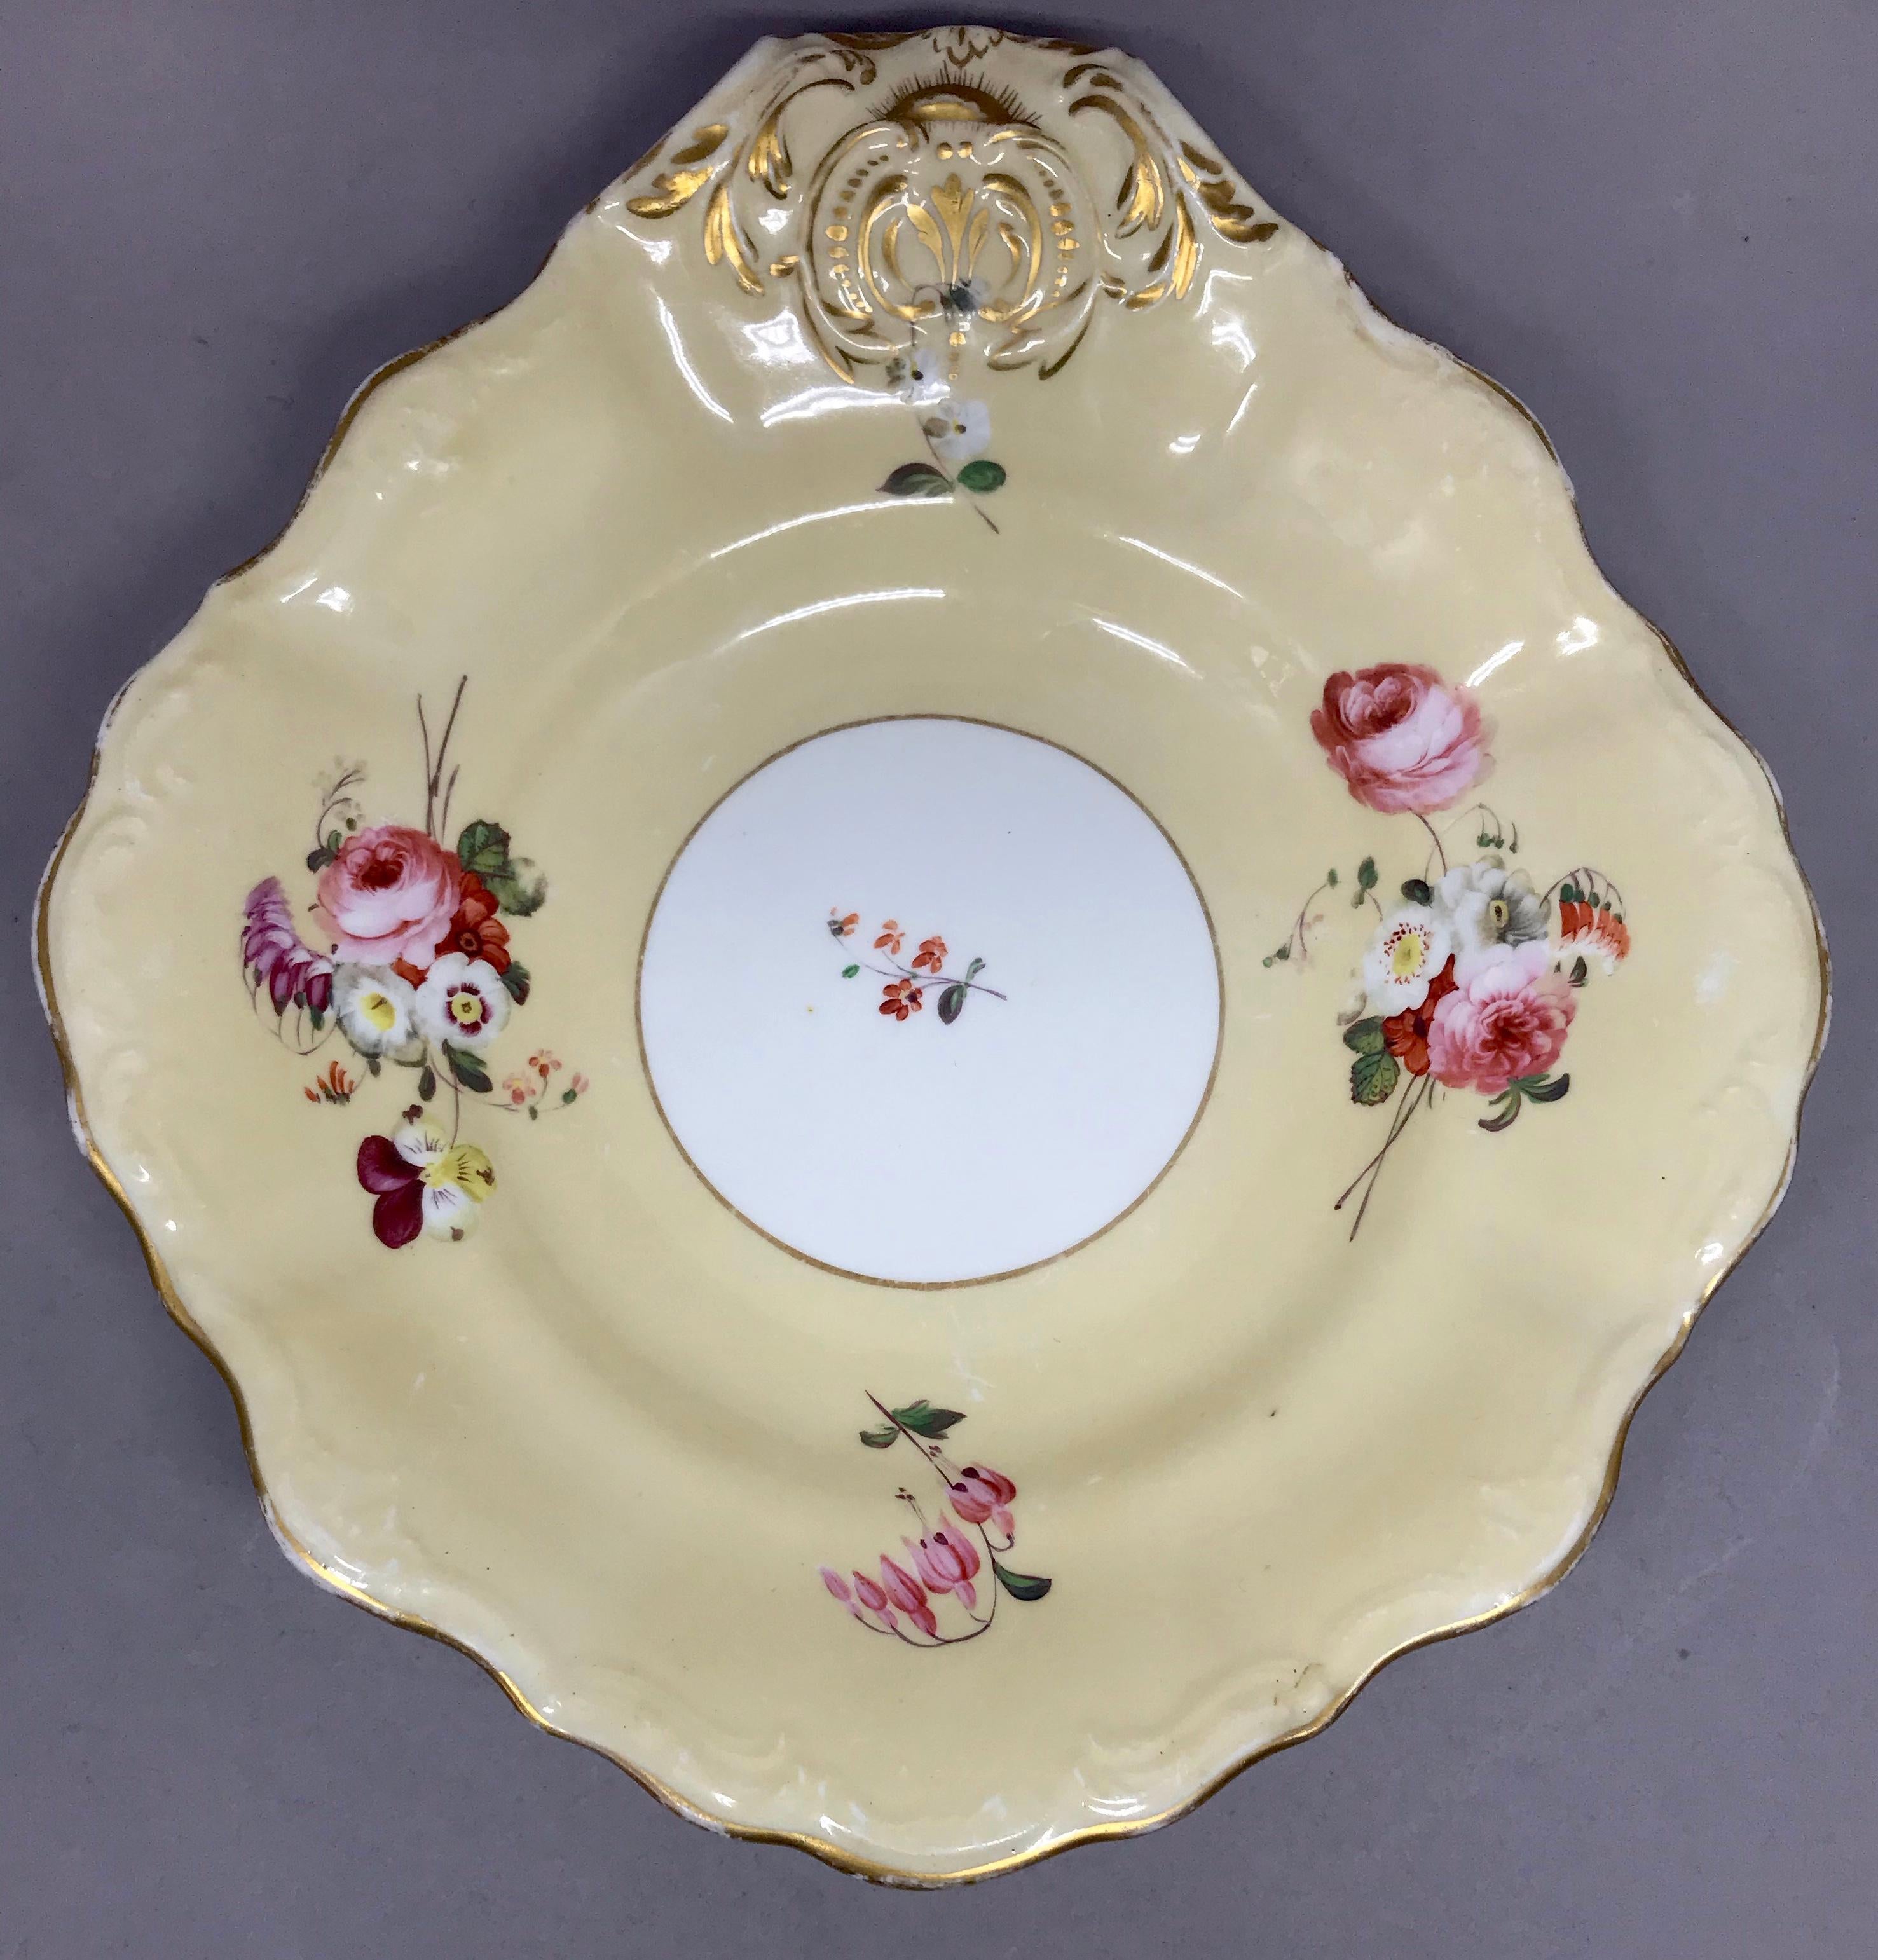 Pair of floral and gilt painted sweetmeat dishes. Pair of shell form sweetmeat dishes with gilding to handle and overall cornsilk field with hand painted rose floral sprays centering on white gilt rim medallion and further floral. Underglaze marking